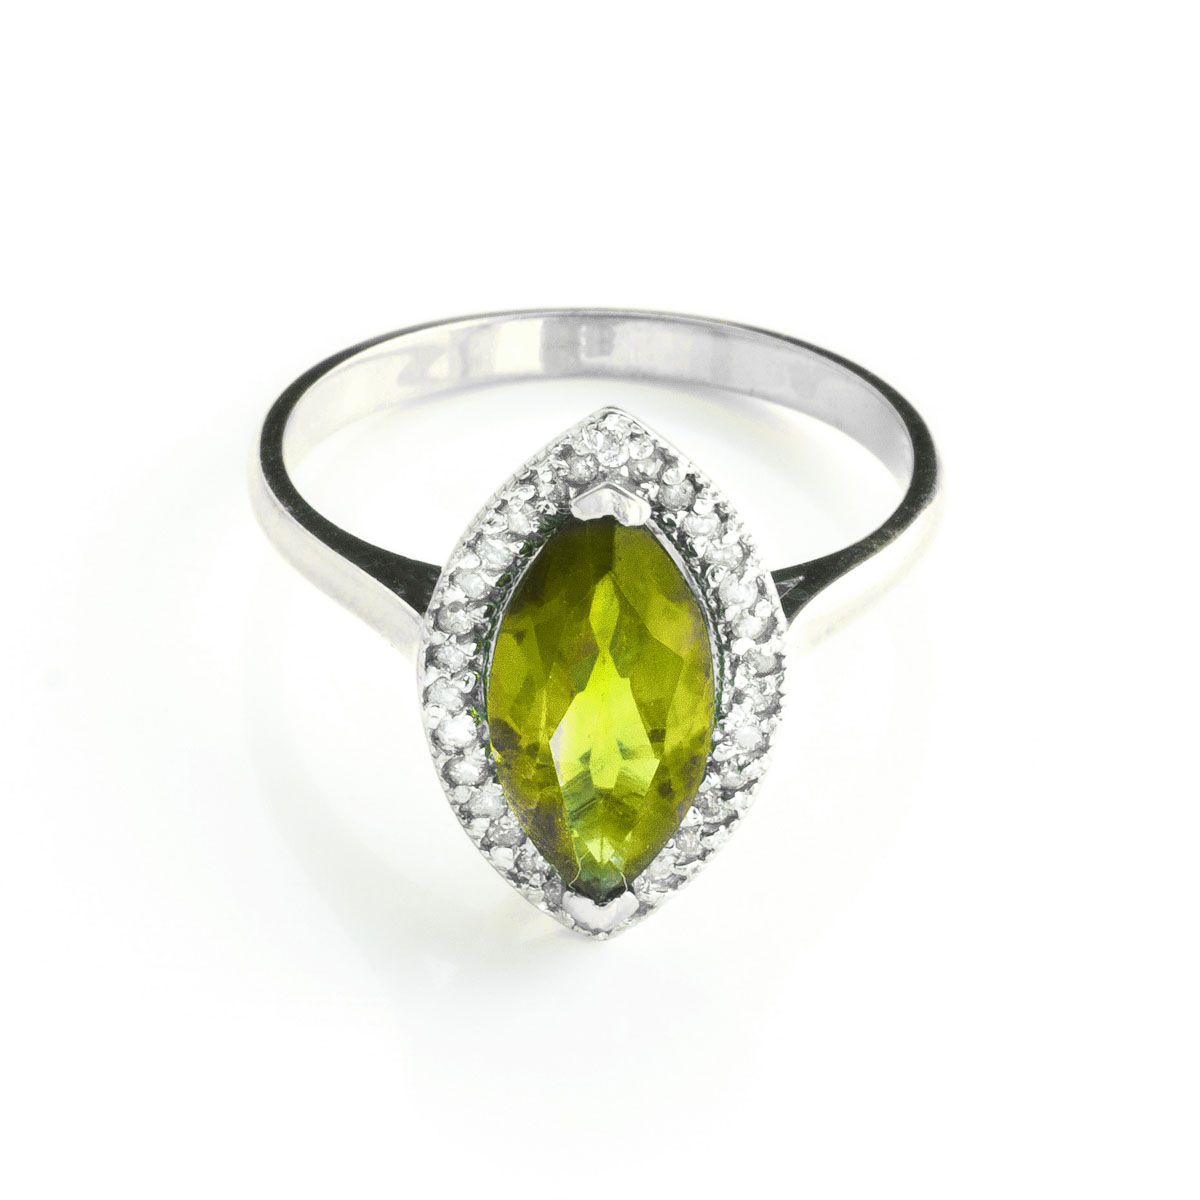 Peridot Halo Ring 2.15 ctw in 18ct White Gold